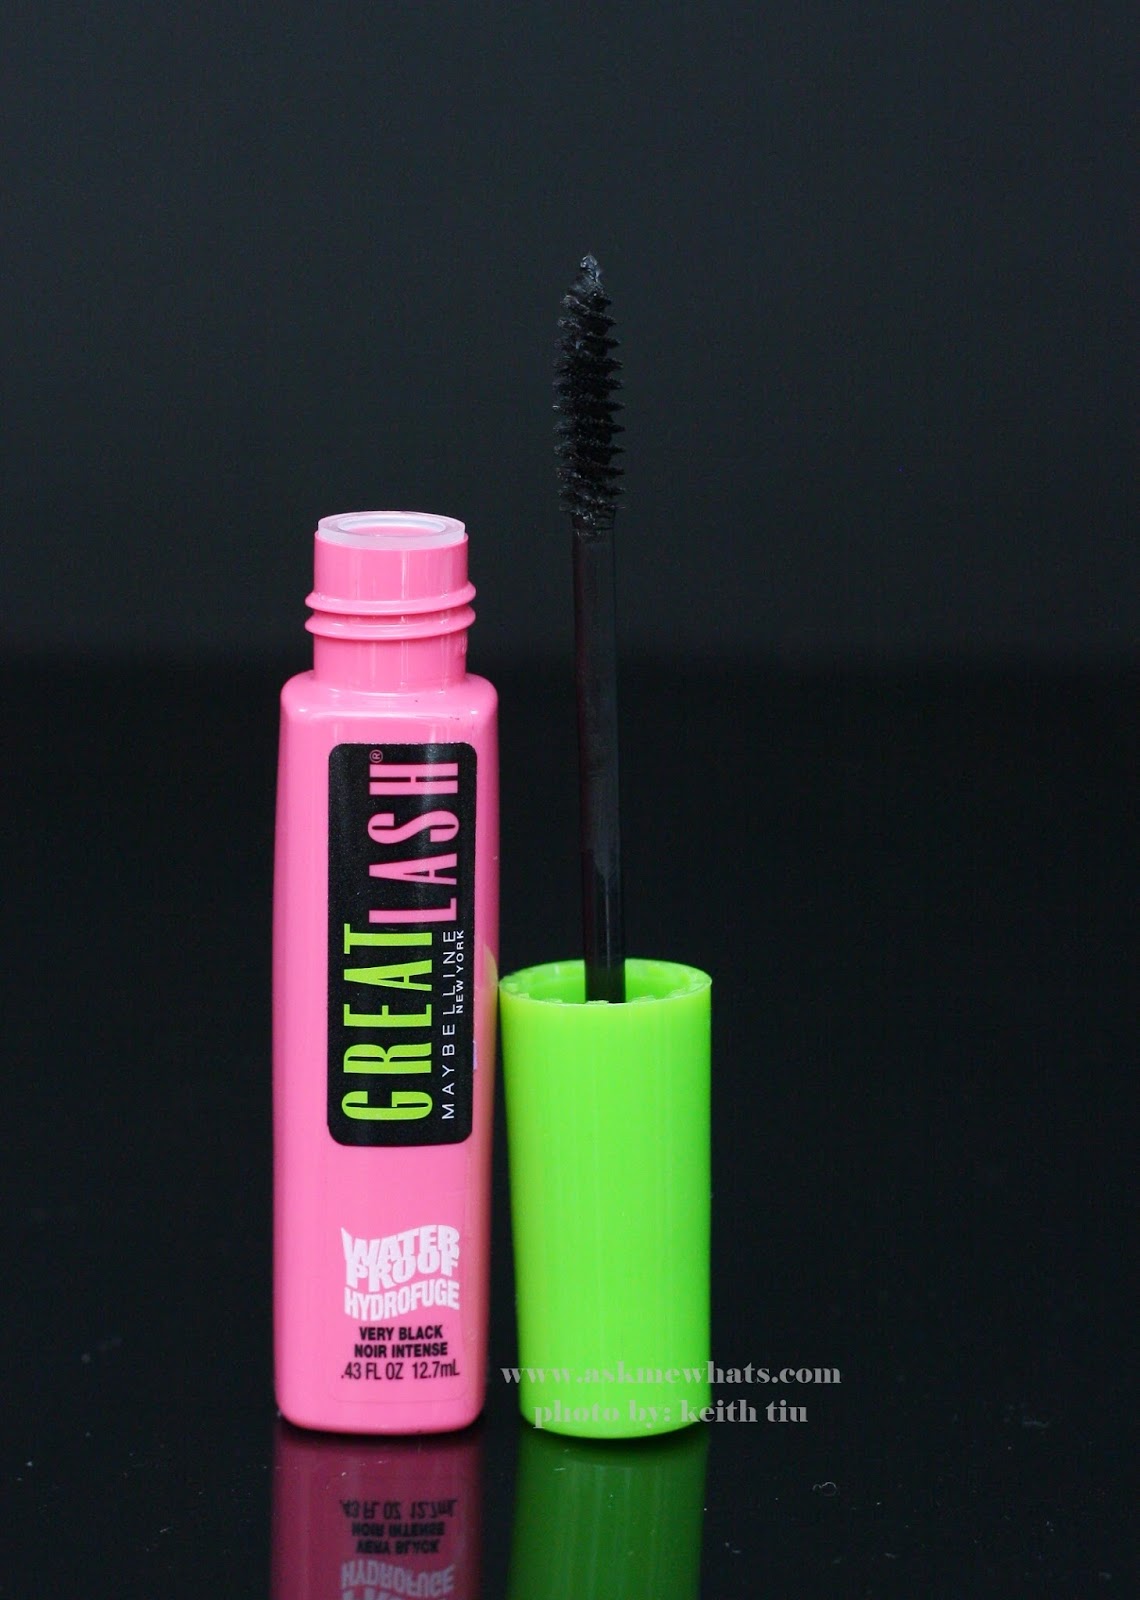 Askmewhats: Maybelline Great Lash Mascara Very Black Review